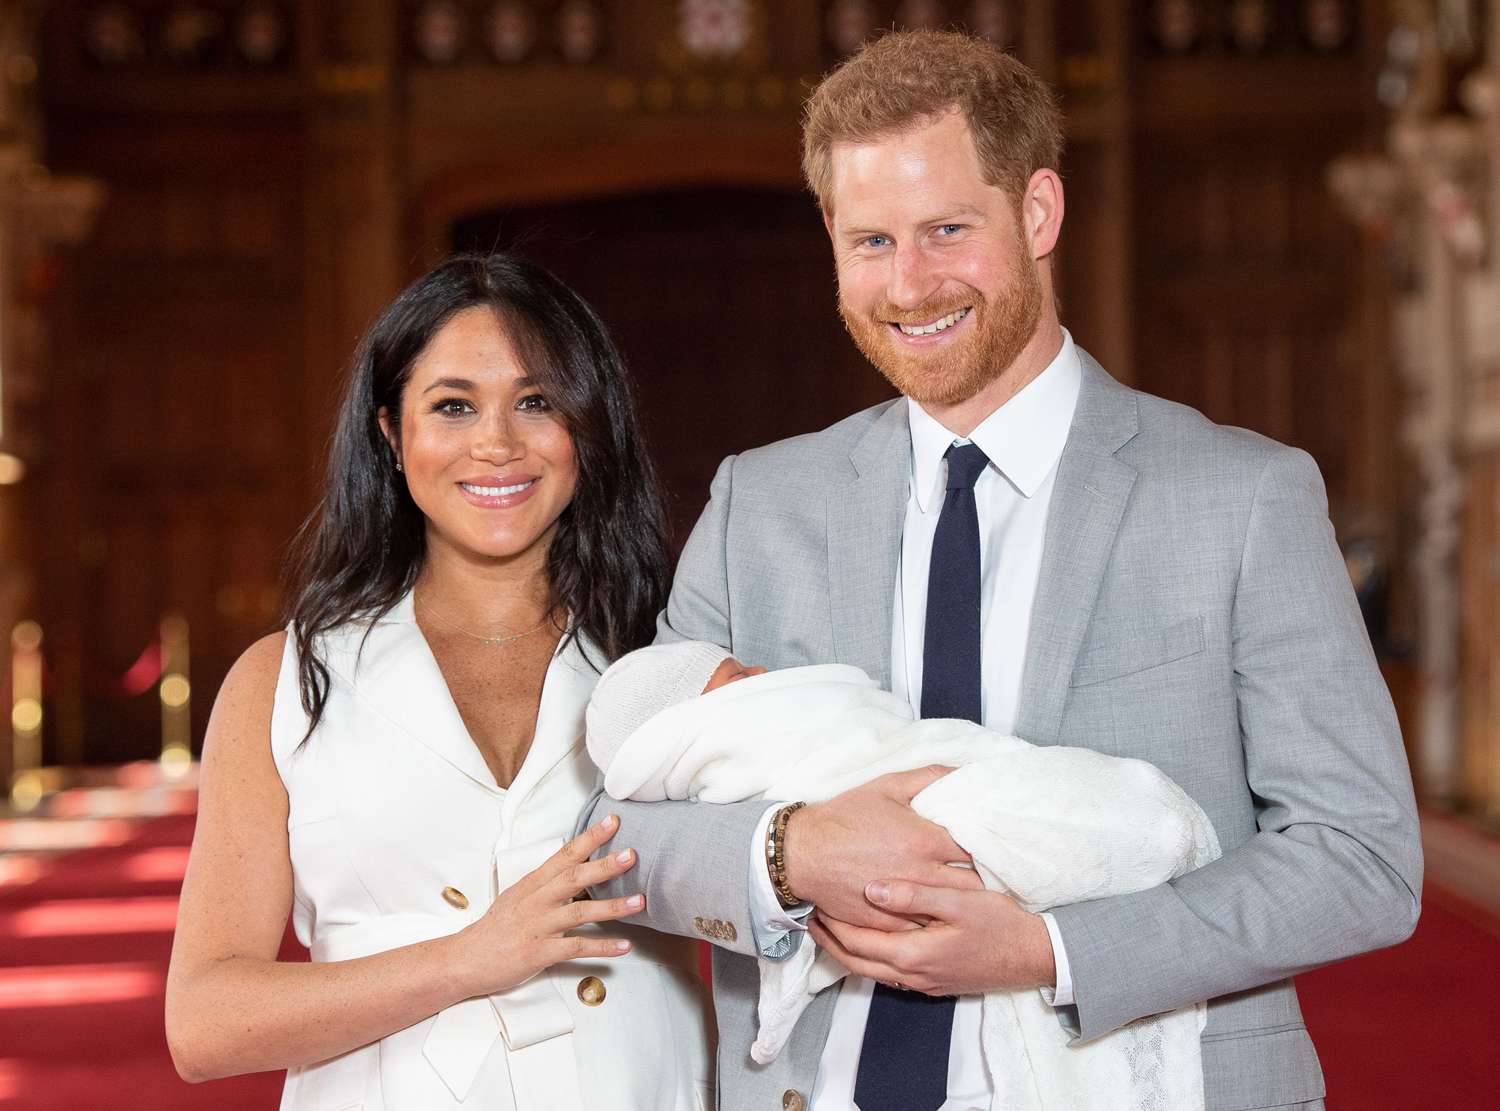 Baby Archie Gave Meghan Markle and Prince Harry Energy to Stand Strong |  PEOPLE.com